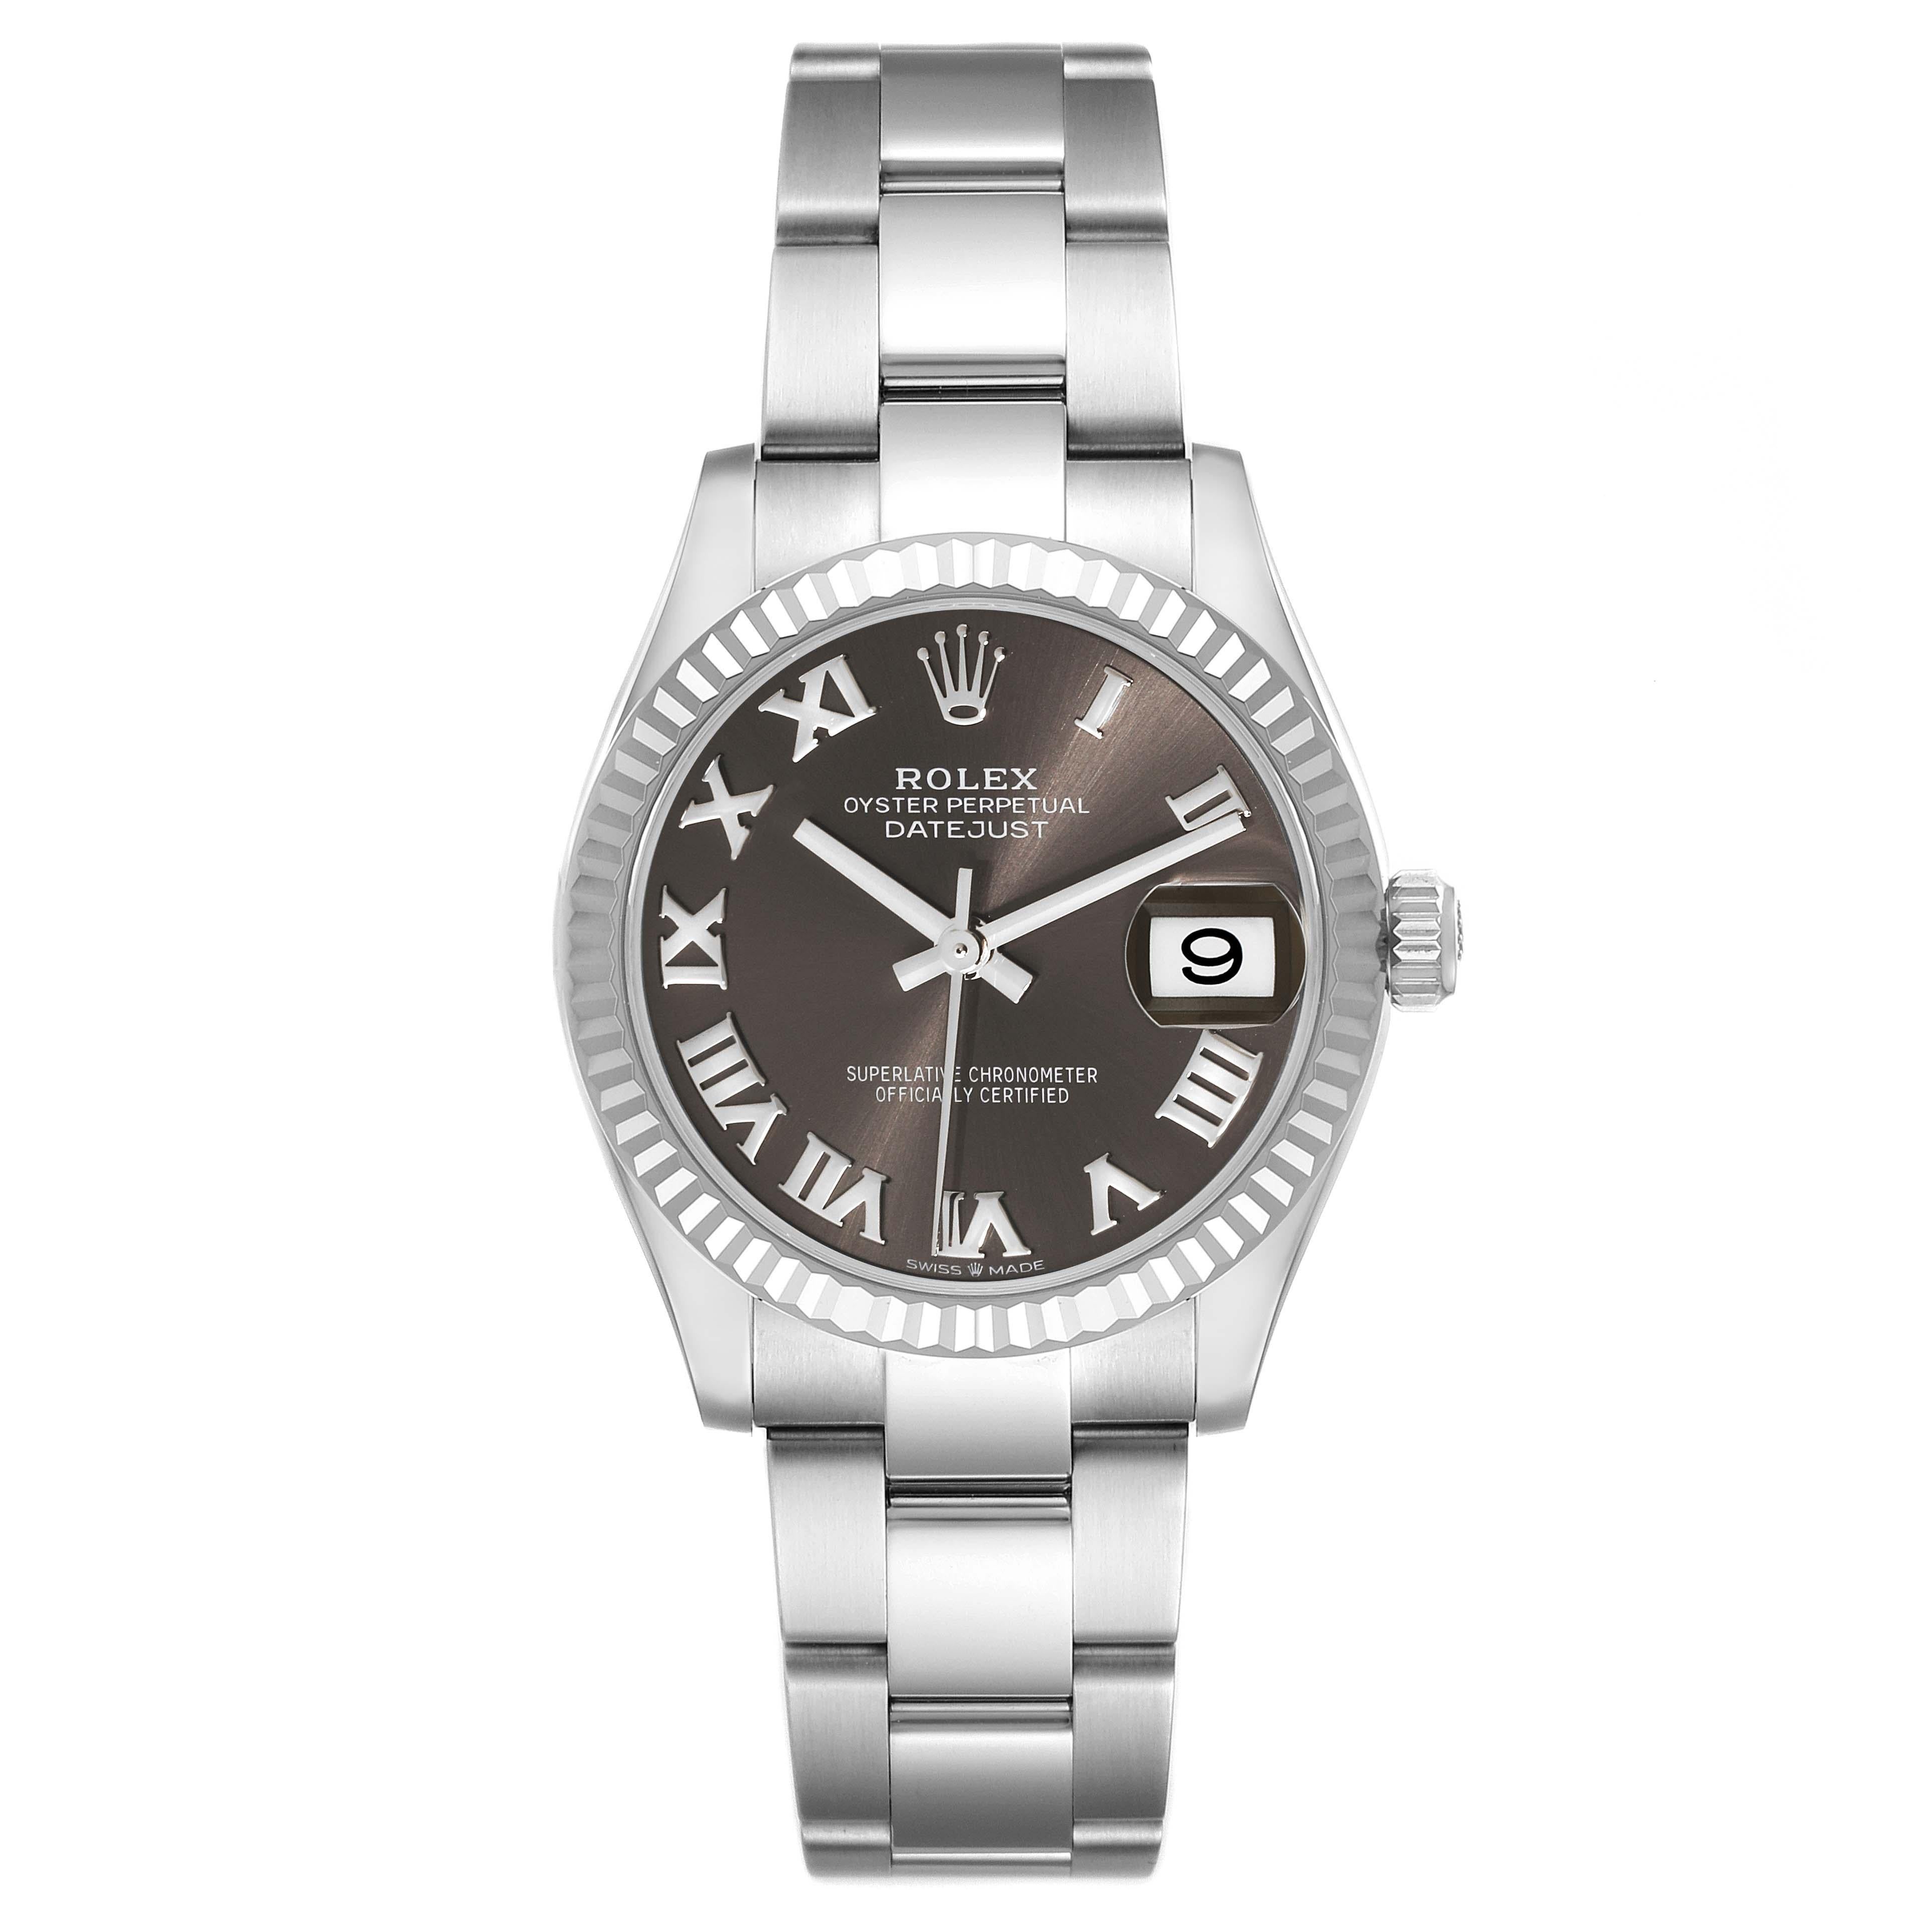 Rolex Datejust Midsize Steel White Gold Slate Dial Ladies Watch 278274. Officially certified chronometer self-winding movement. Stainless steel oyster case 31.0 mm in diameter. Rolex logo on a crown. 18k white gold fluted bezel. Scratch resistant